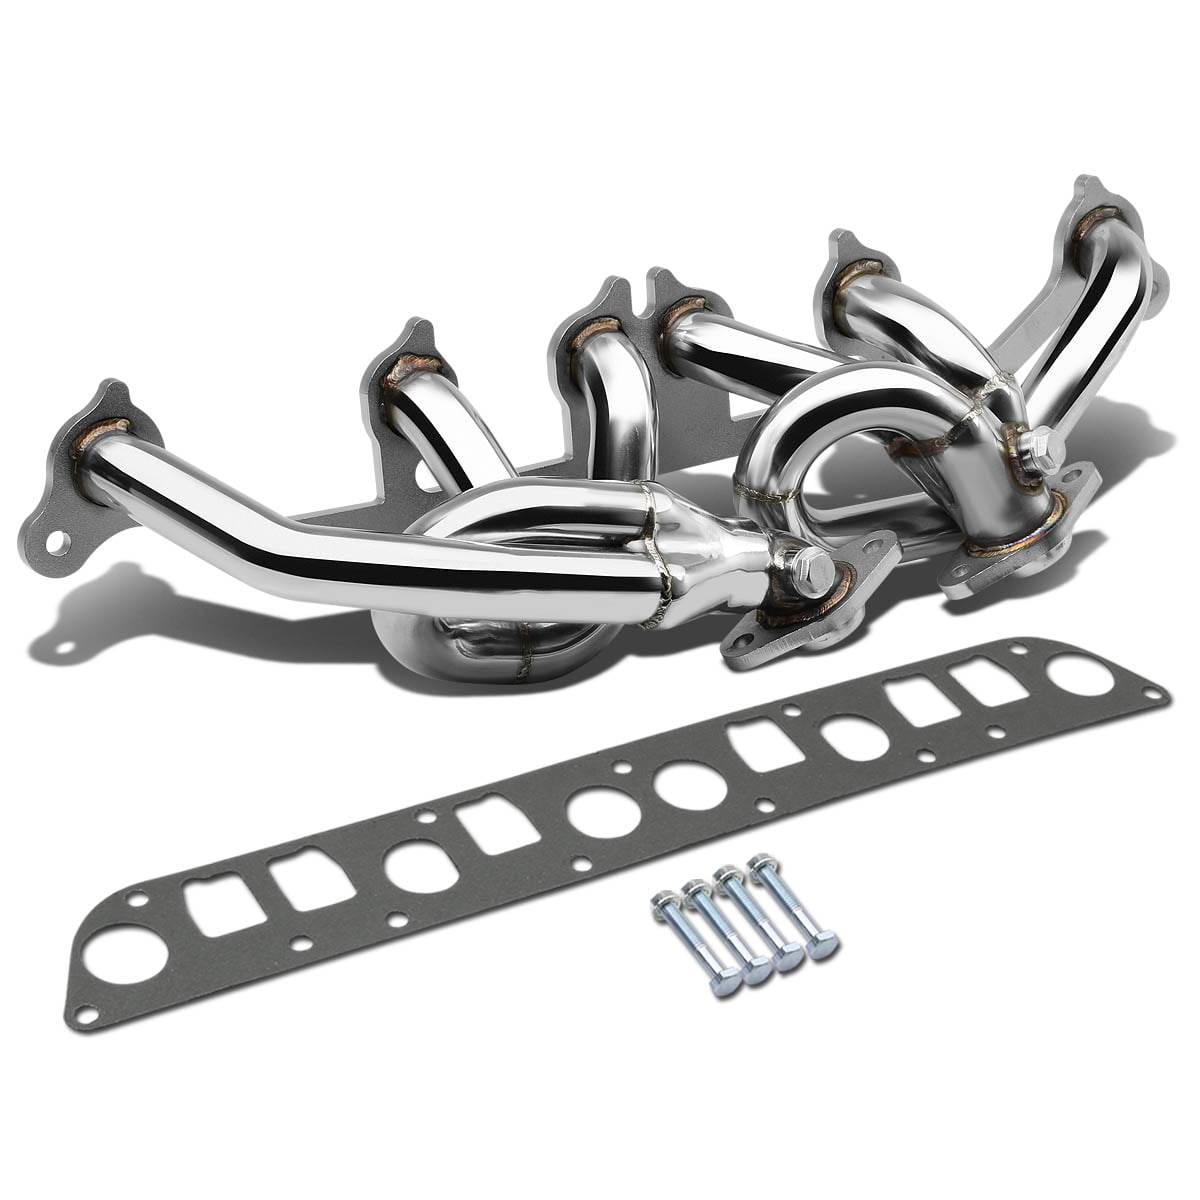 DNA Motoring HDS-JC0040L Stainless Steel Manifold Header Exhaust System for  2000-2006 Jeep Wrangler TJ  